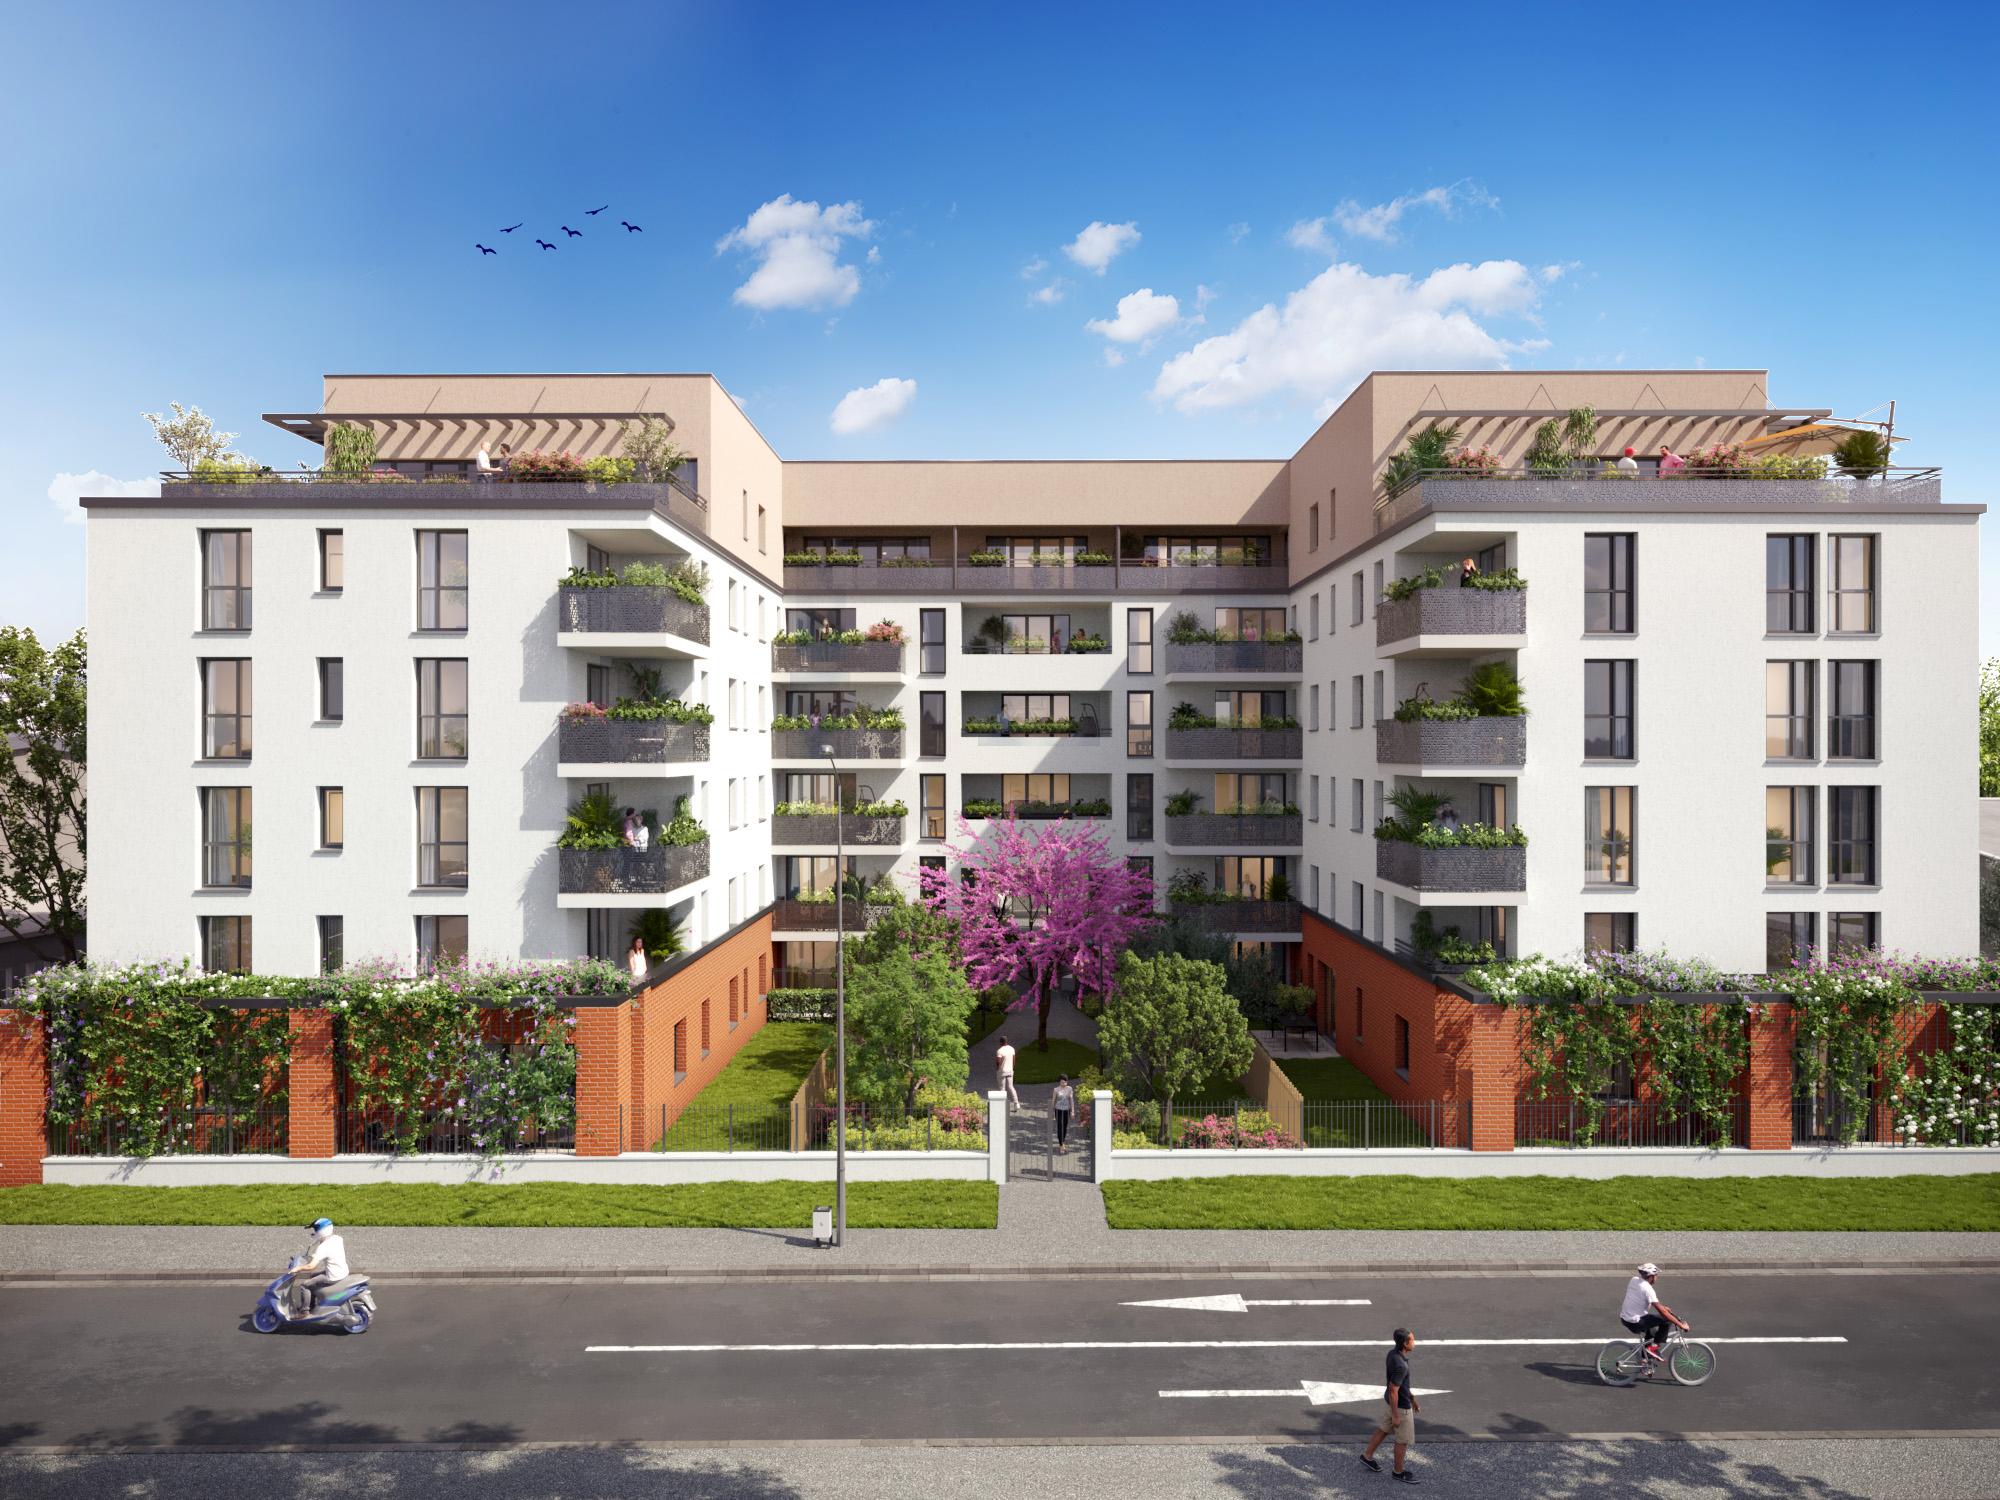 Programme immobilier neuf 31000 Toulouse Logements neufs Toulouse 4737